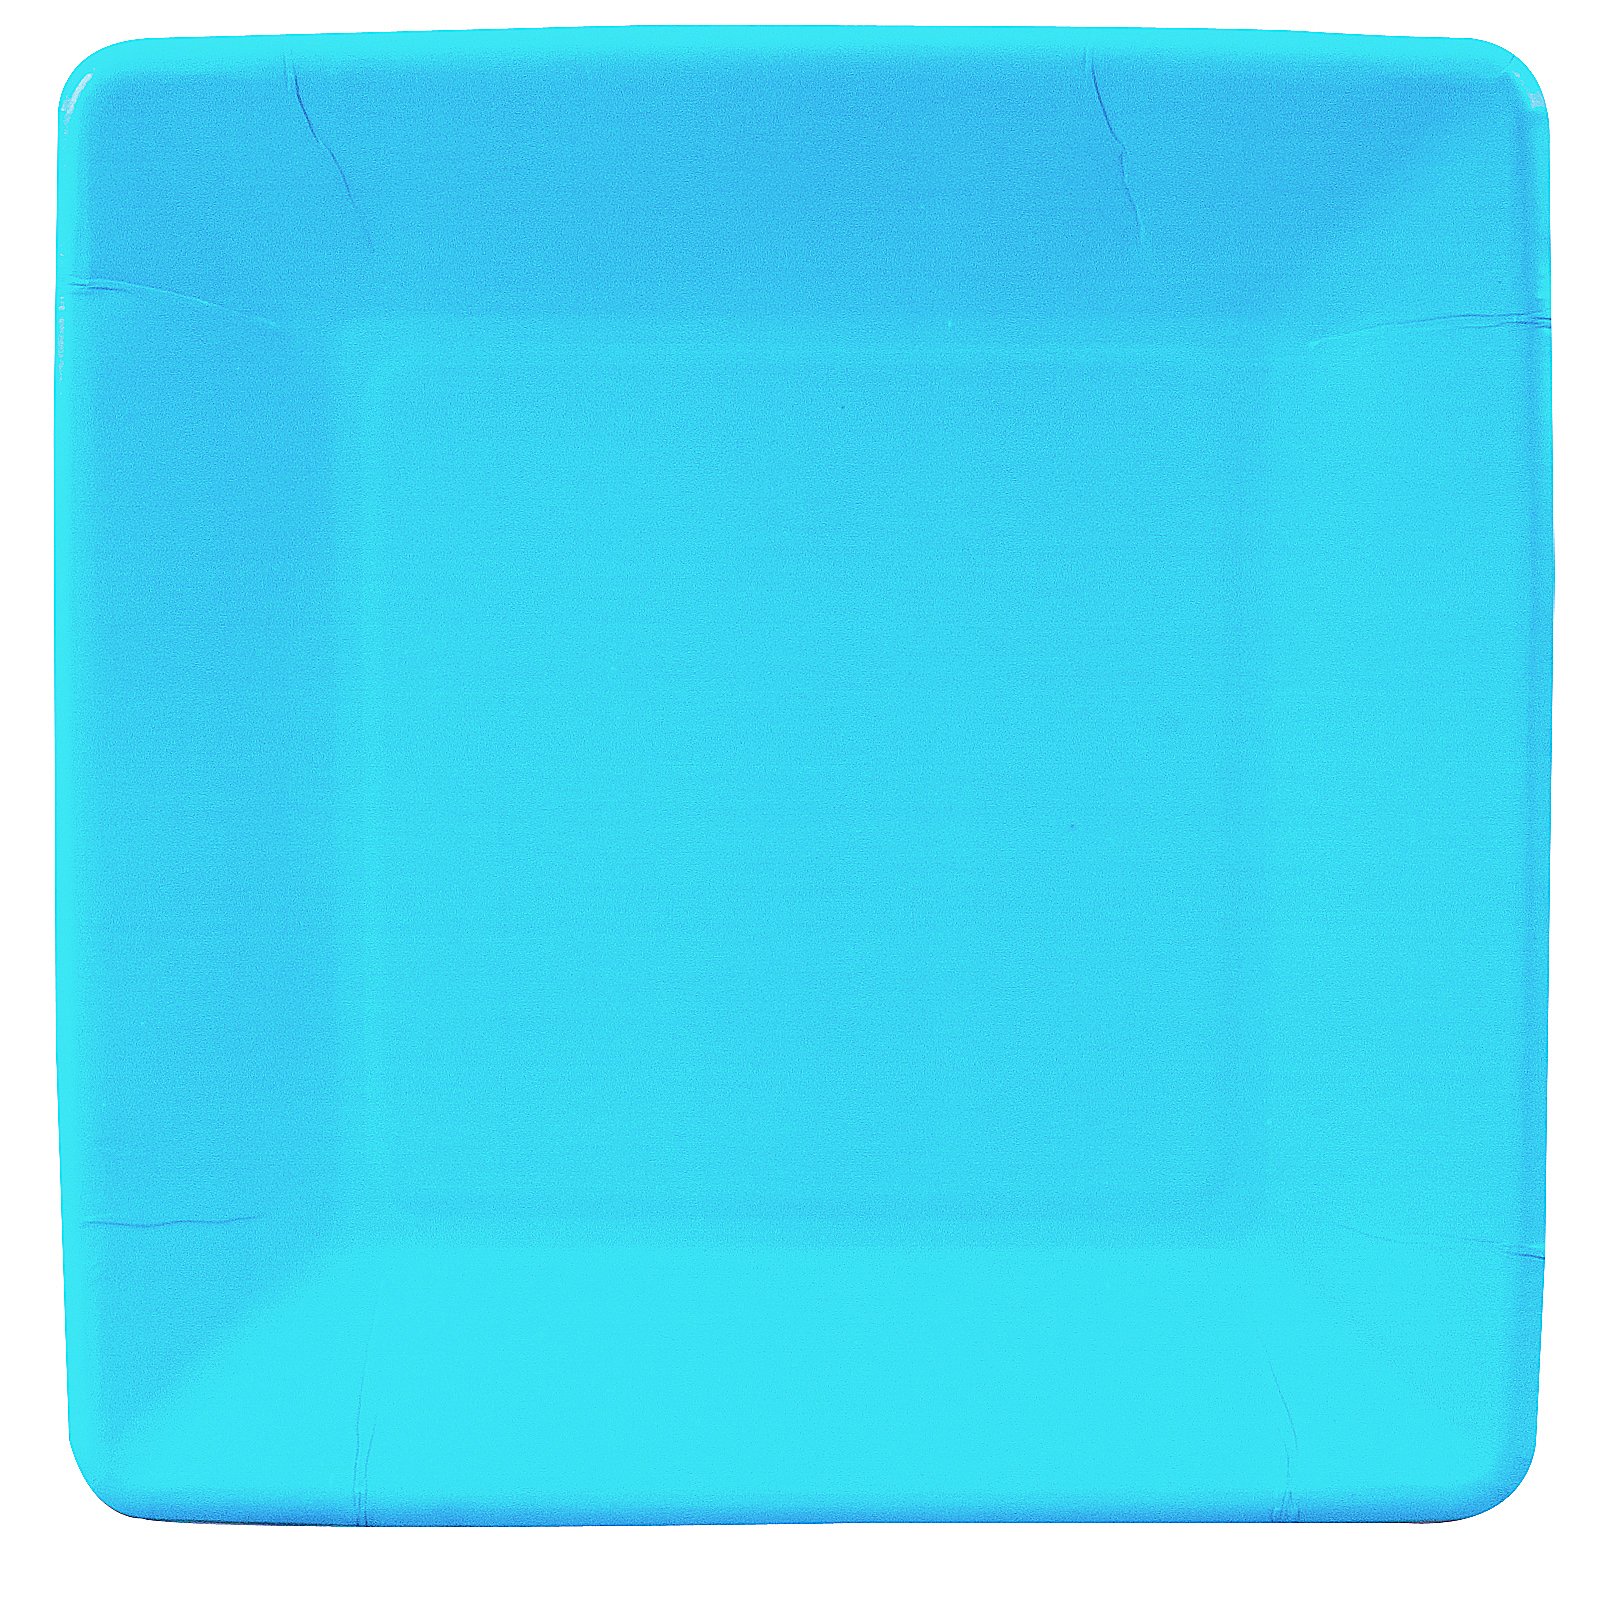 Bermuda Blue (Turquoise) Square Dinner Plates (18 count) - Click Image to Close